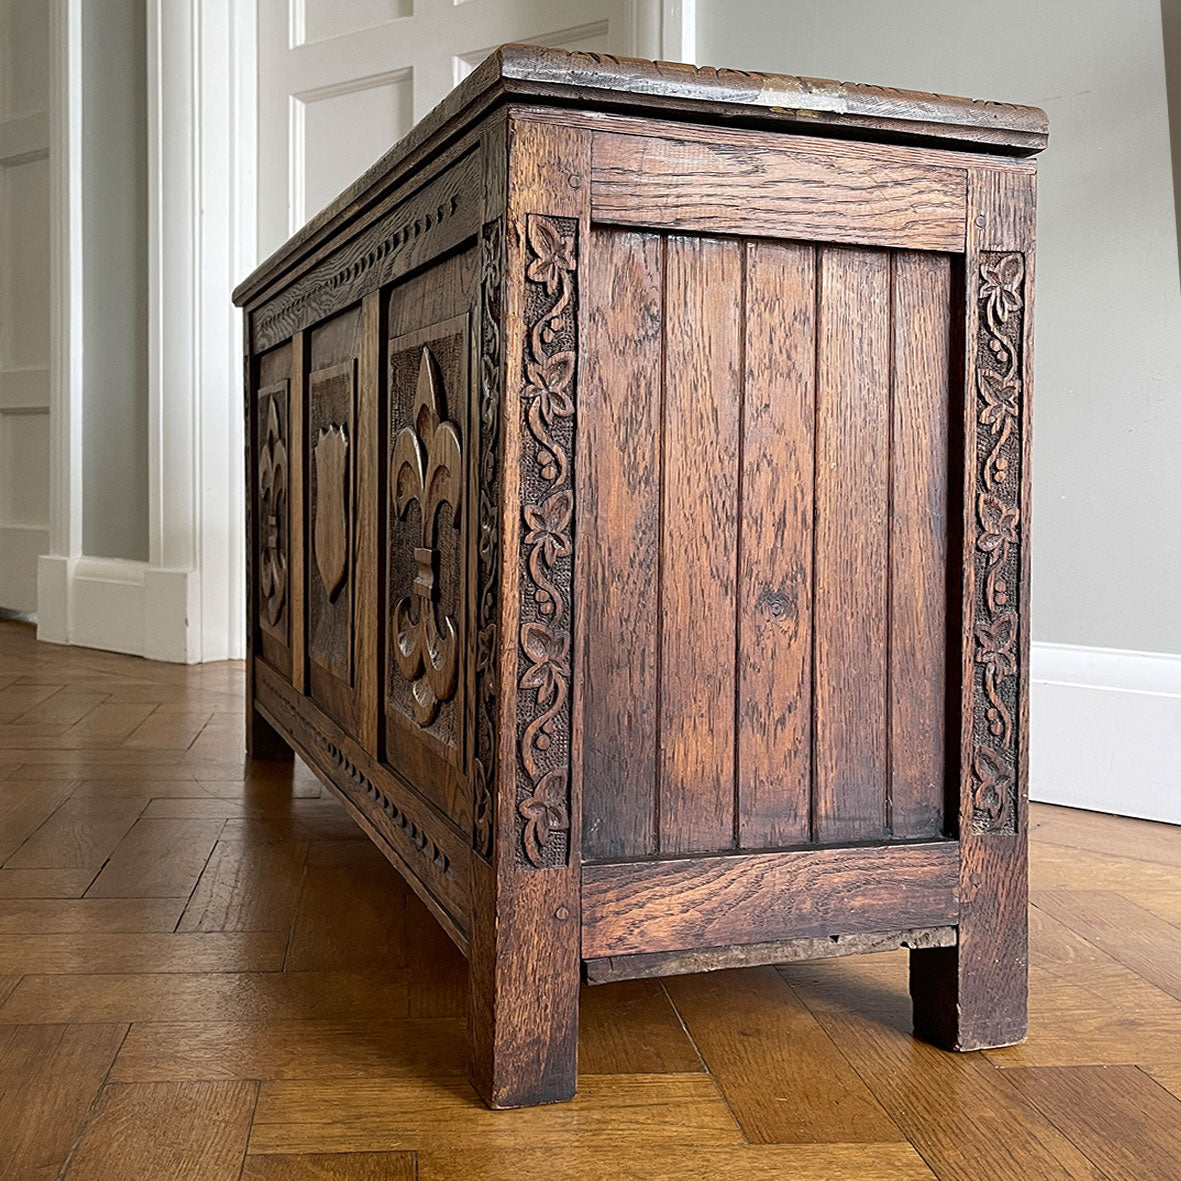 A solid oak chest with fleur de lis and shield carving to the front. Very solid and very heavy! Perfect for a large flat screen TV or for the hallway to keep your boots and shoes in. COMPOSITION: Solid Oak DIMENSIONS: (L) 93.5cm (W) 32cm (H) 59cm - SHOP NOW - www.intovintage.co.uk